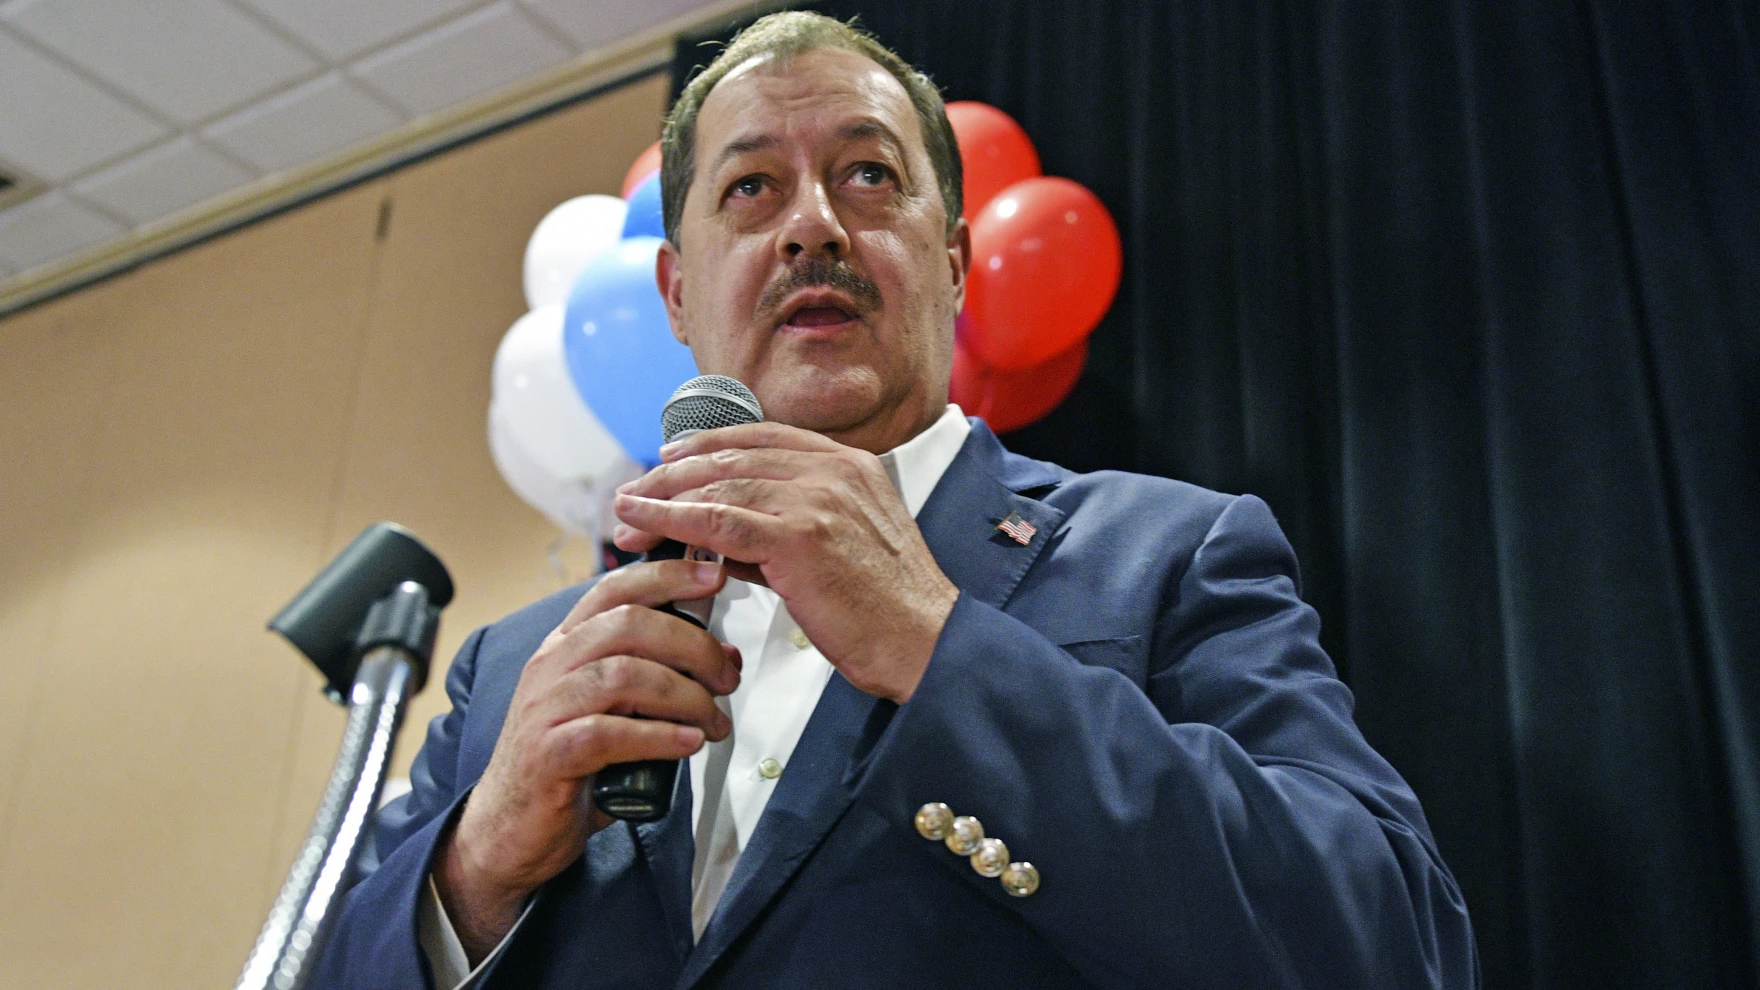 An older man speaks into a microphone, as red, white, and blue balloons are seen behind his head.